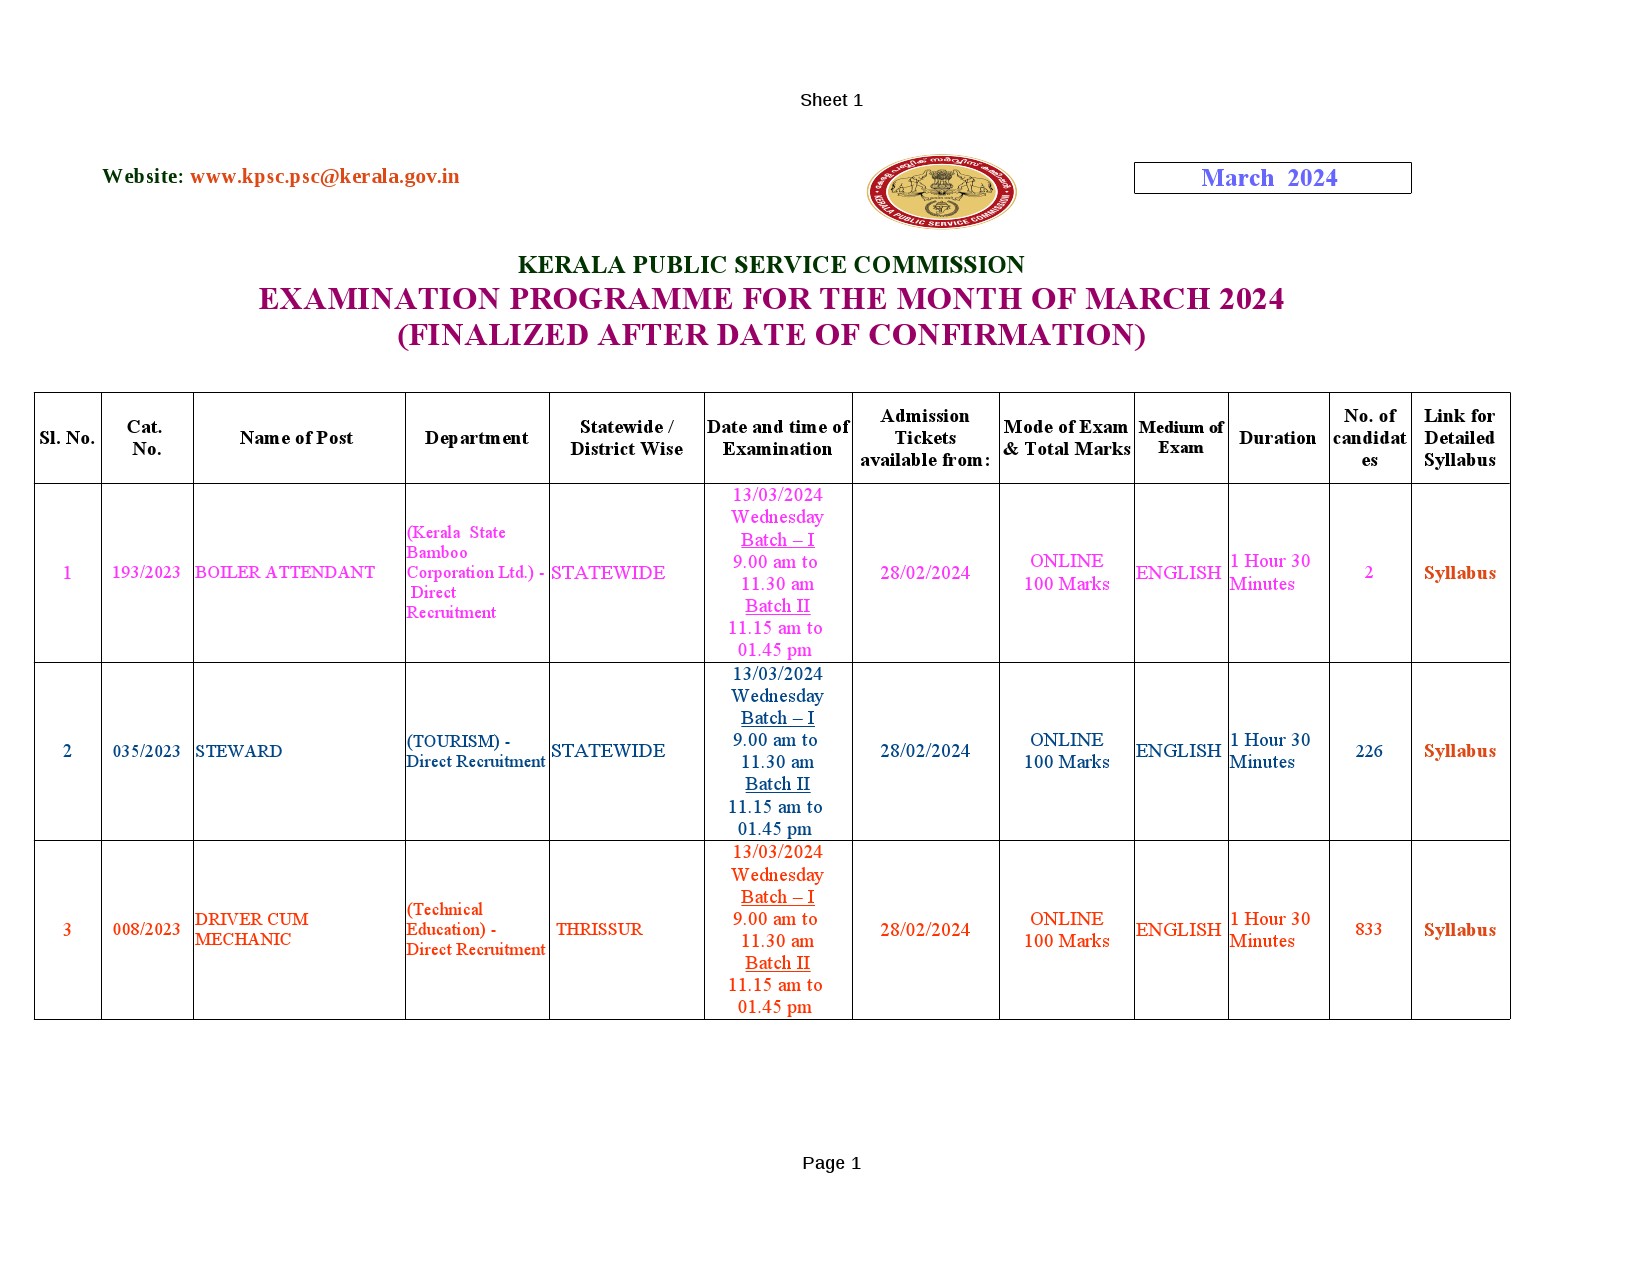 Examination Programme For The Month Of March 2024 - Notification Image 1